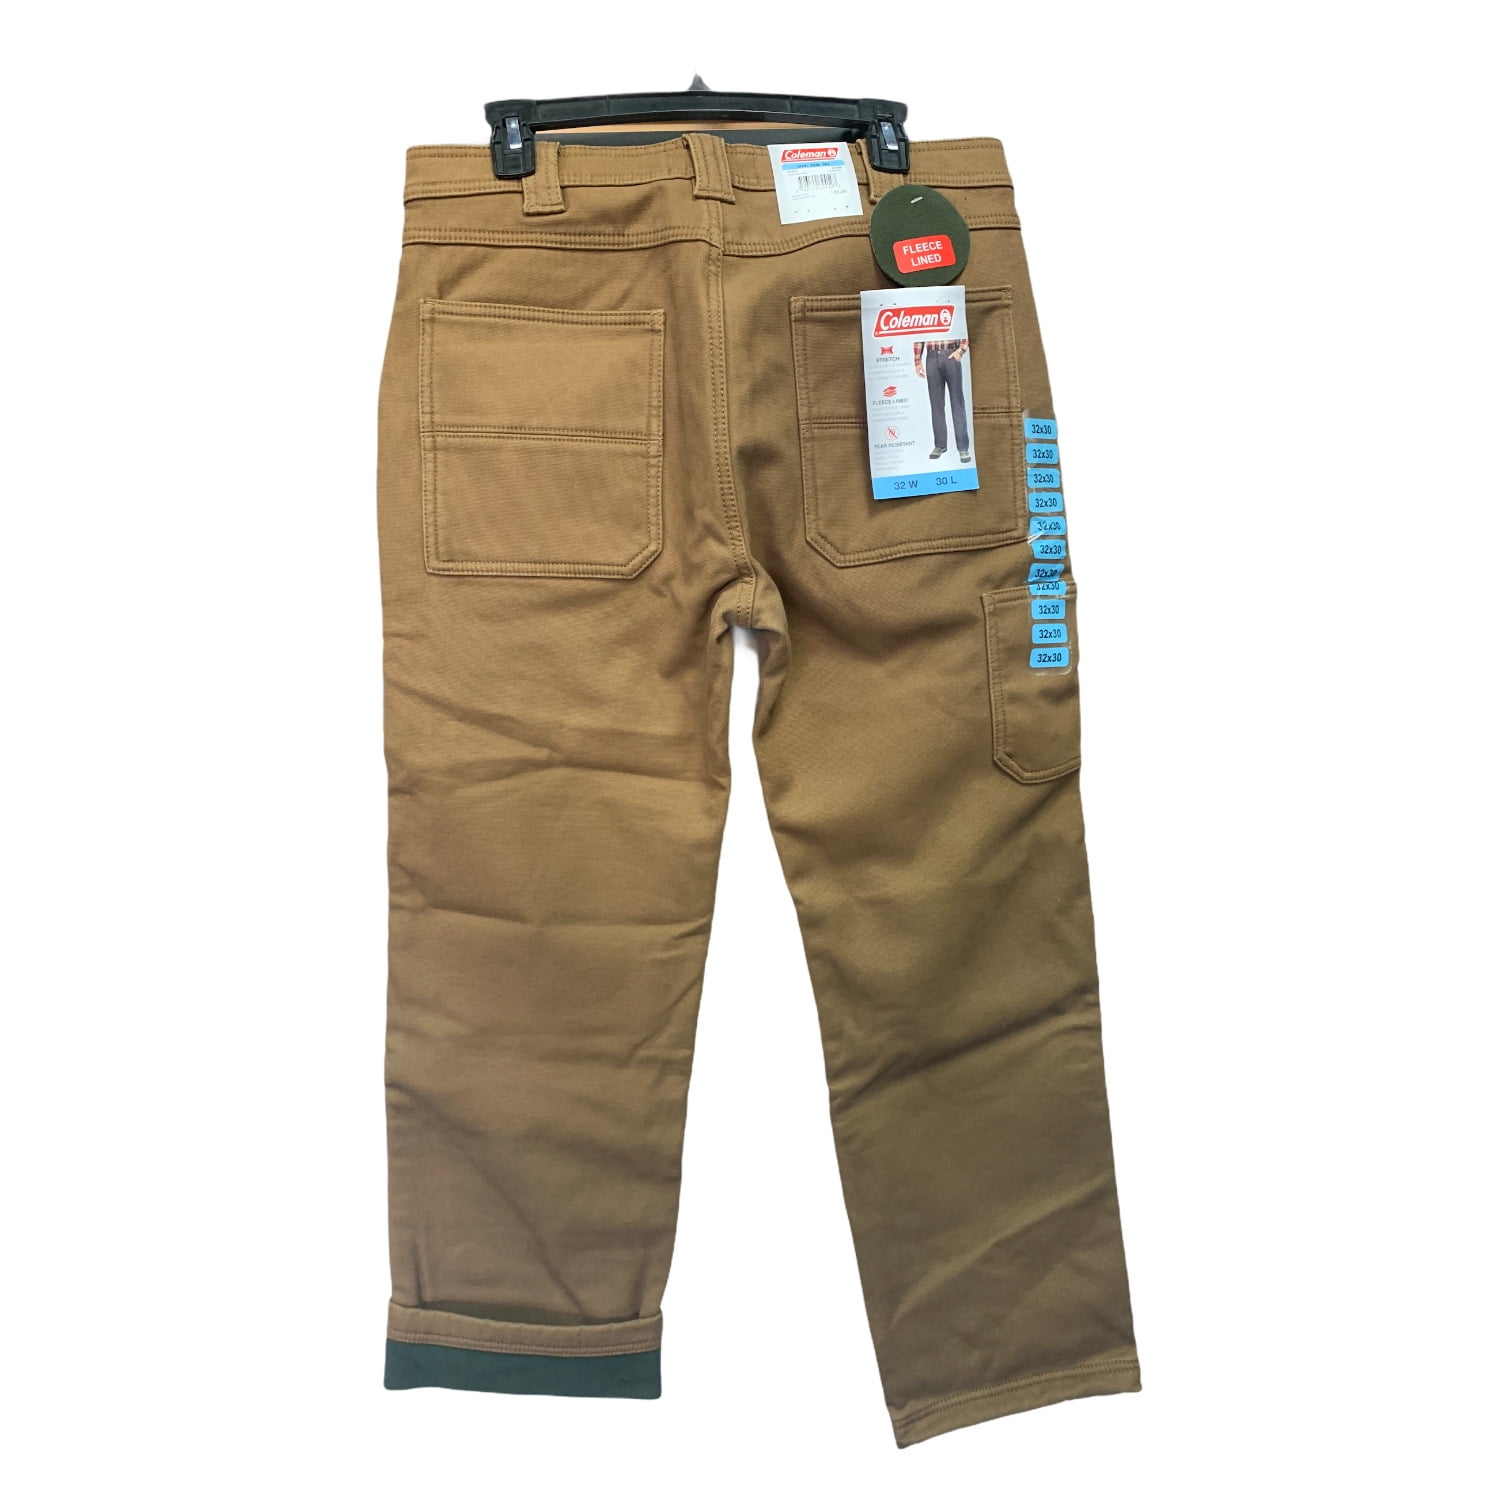 Coleman Fleece Lined Stretch & Tear Resistant Rugged Pants